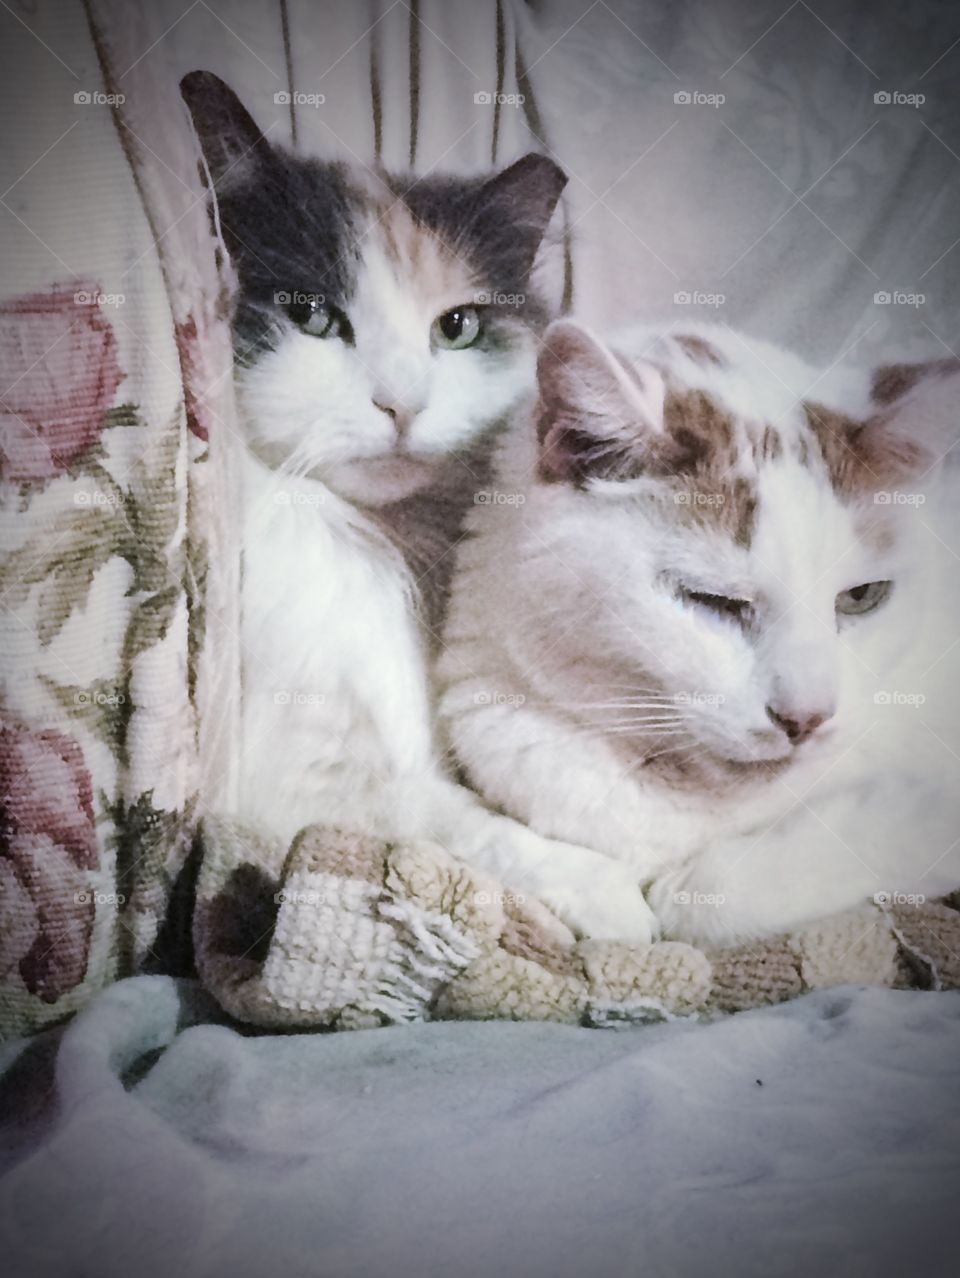 Amelia and Kippy, a May-December romance, were inseparable. Beautiful longhaired calico with shorthairs orange and white.